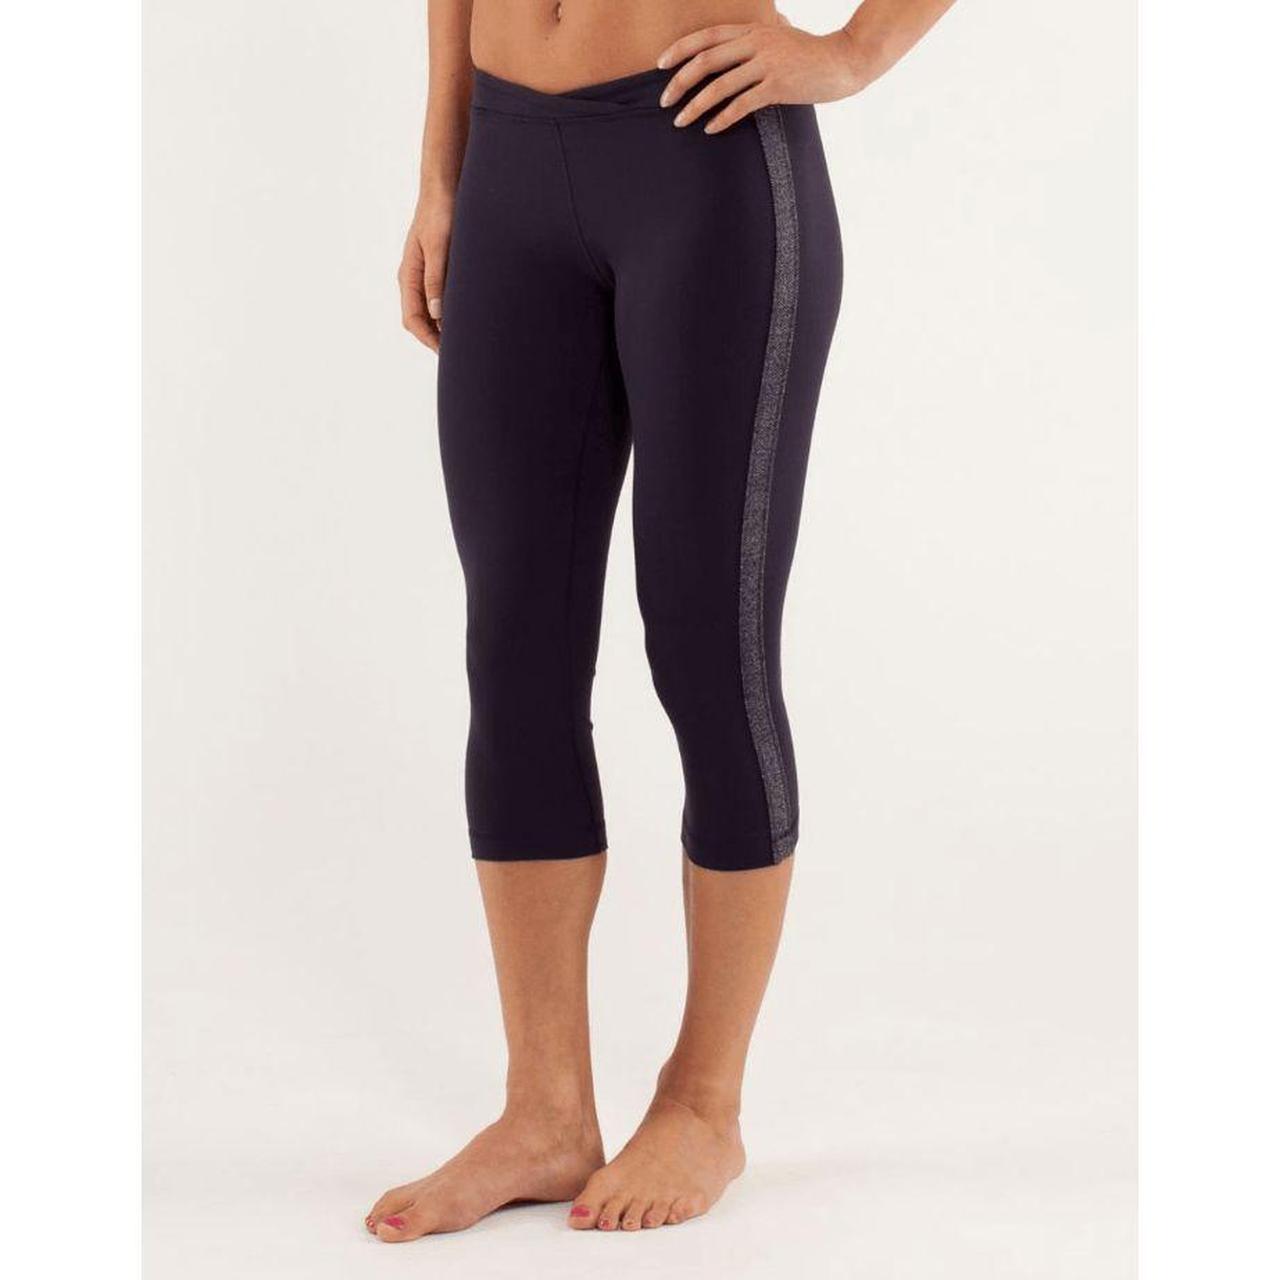 Lululemon Navy Blue and Pink Cropped Athletic